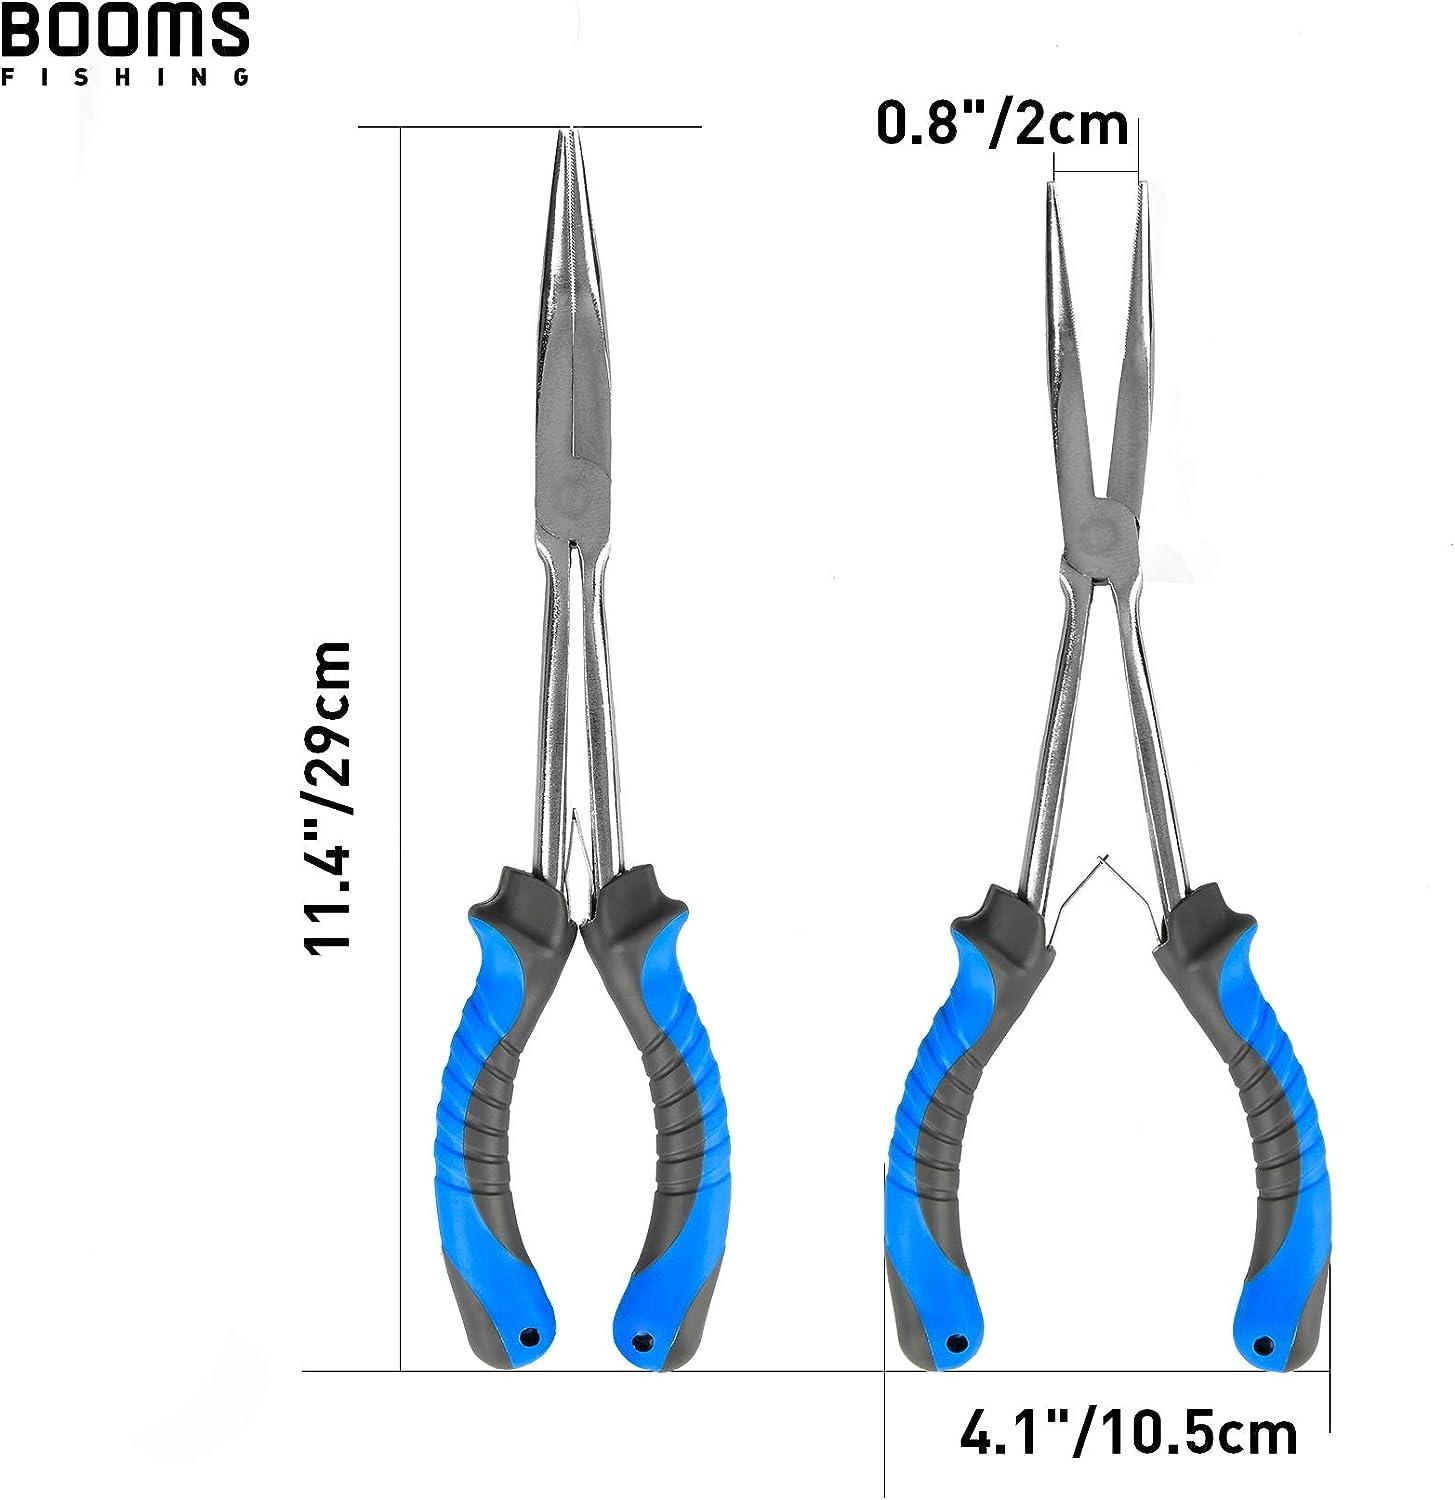 Booms Fishing F05 Hook Remover Long Nose Fishing Pliers 11 Inches